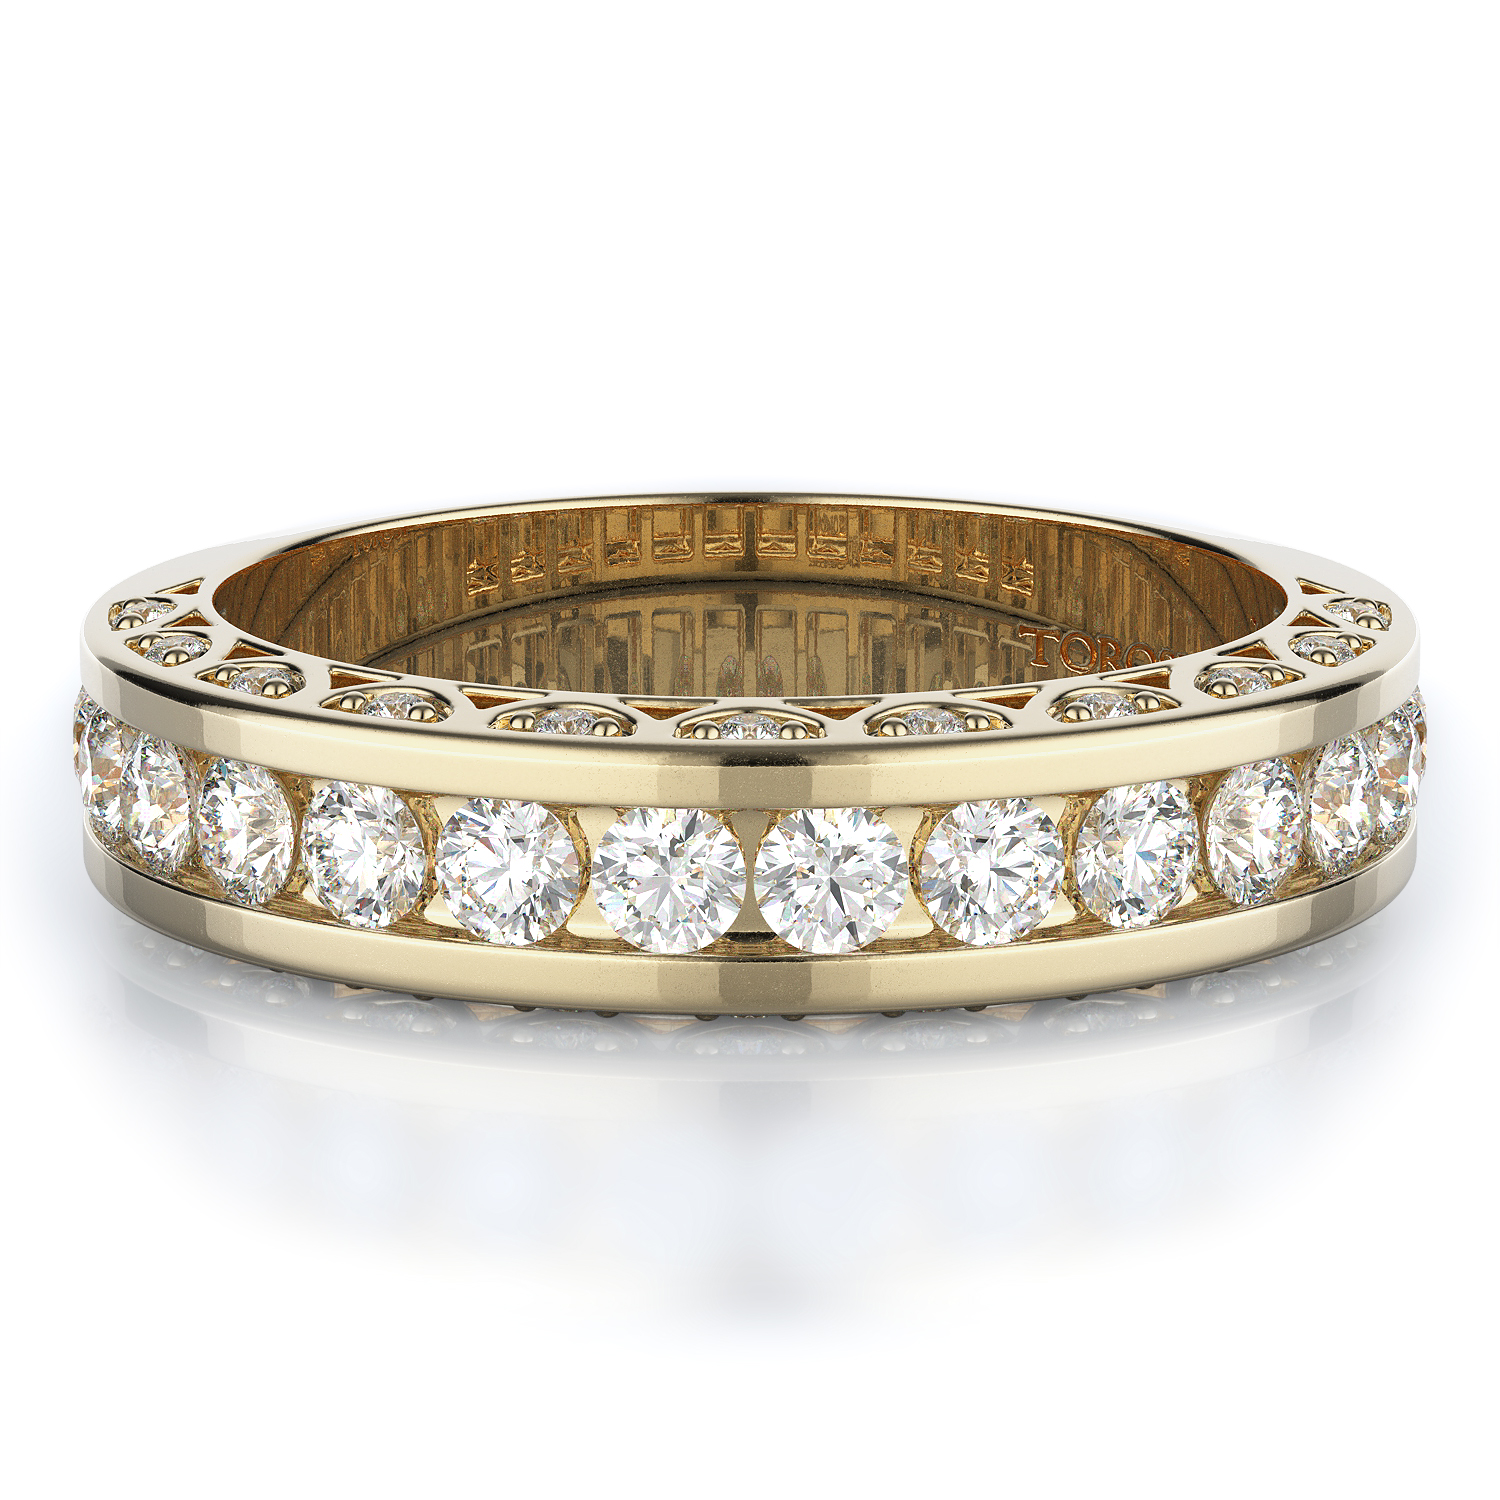 Pave, Channel Style Diamond Wedding band
 | 0.82 ctw product image